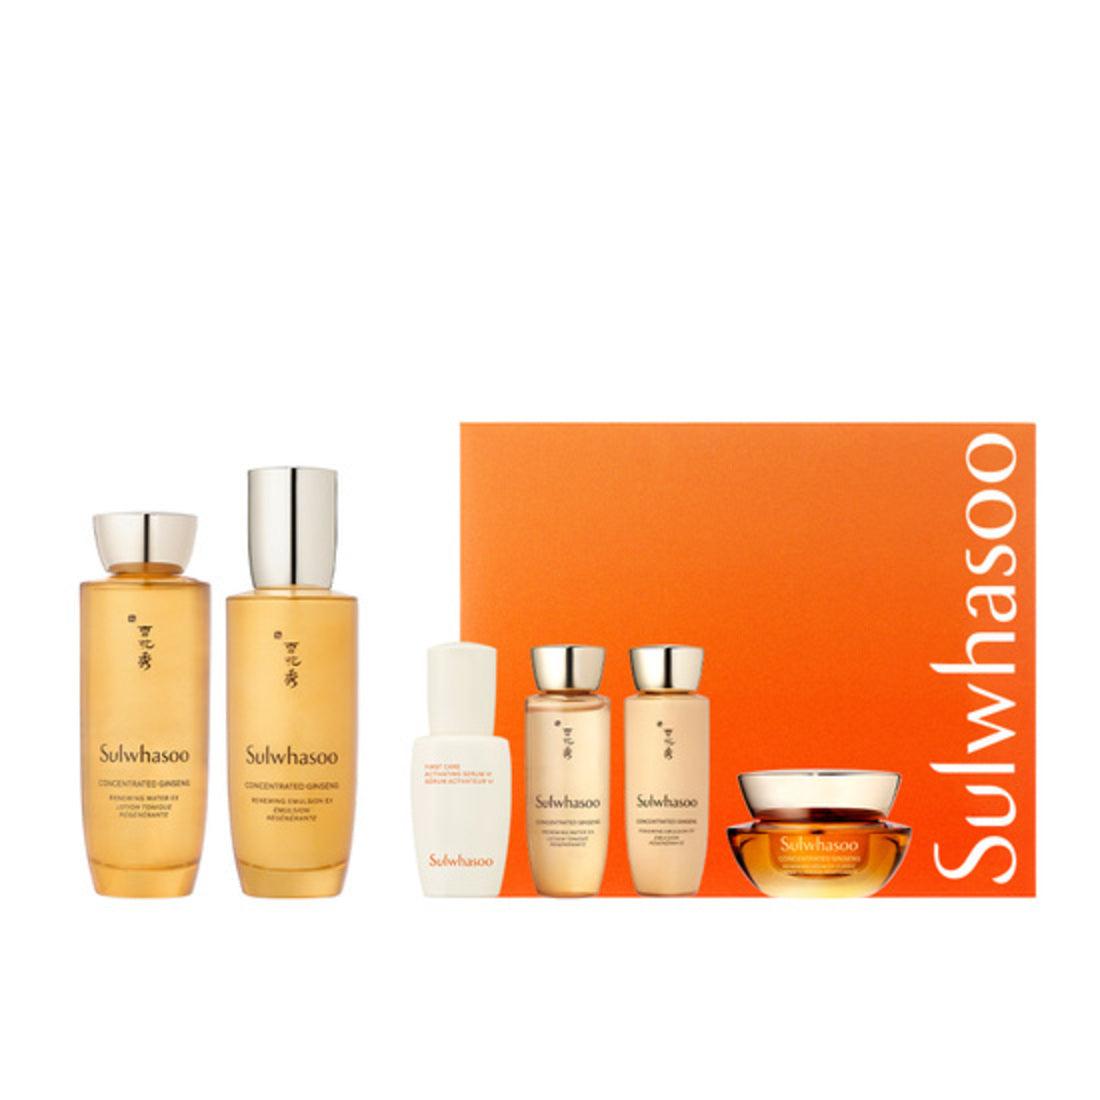 Bộ Dưỡng Da Sulwhasoo Concentrated Ginseng Daily Routine Set - Kallos Vietnam